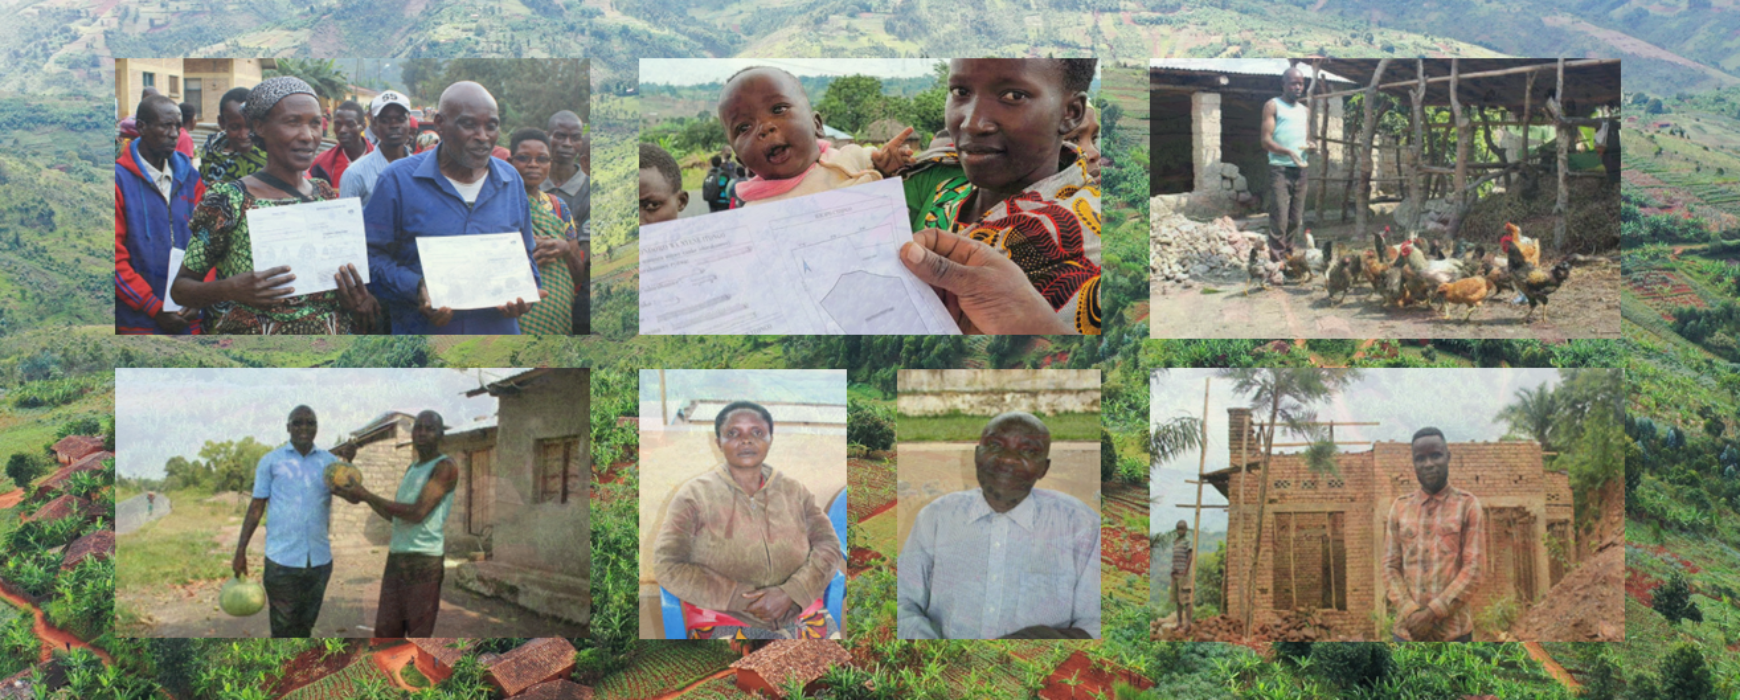 BURUNDI/ Land tenure security component of the PRRPB programme: a socially useful project